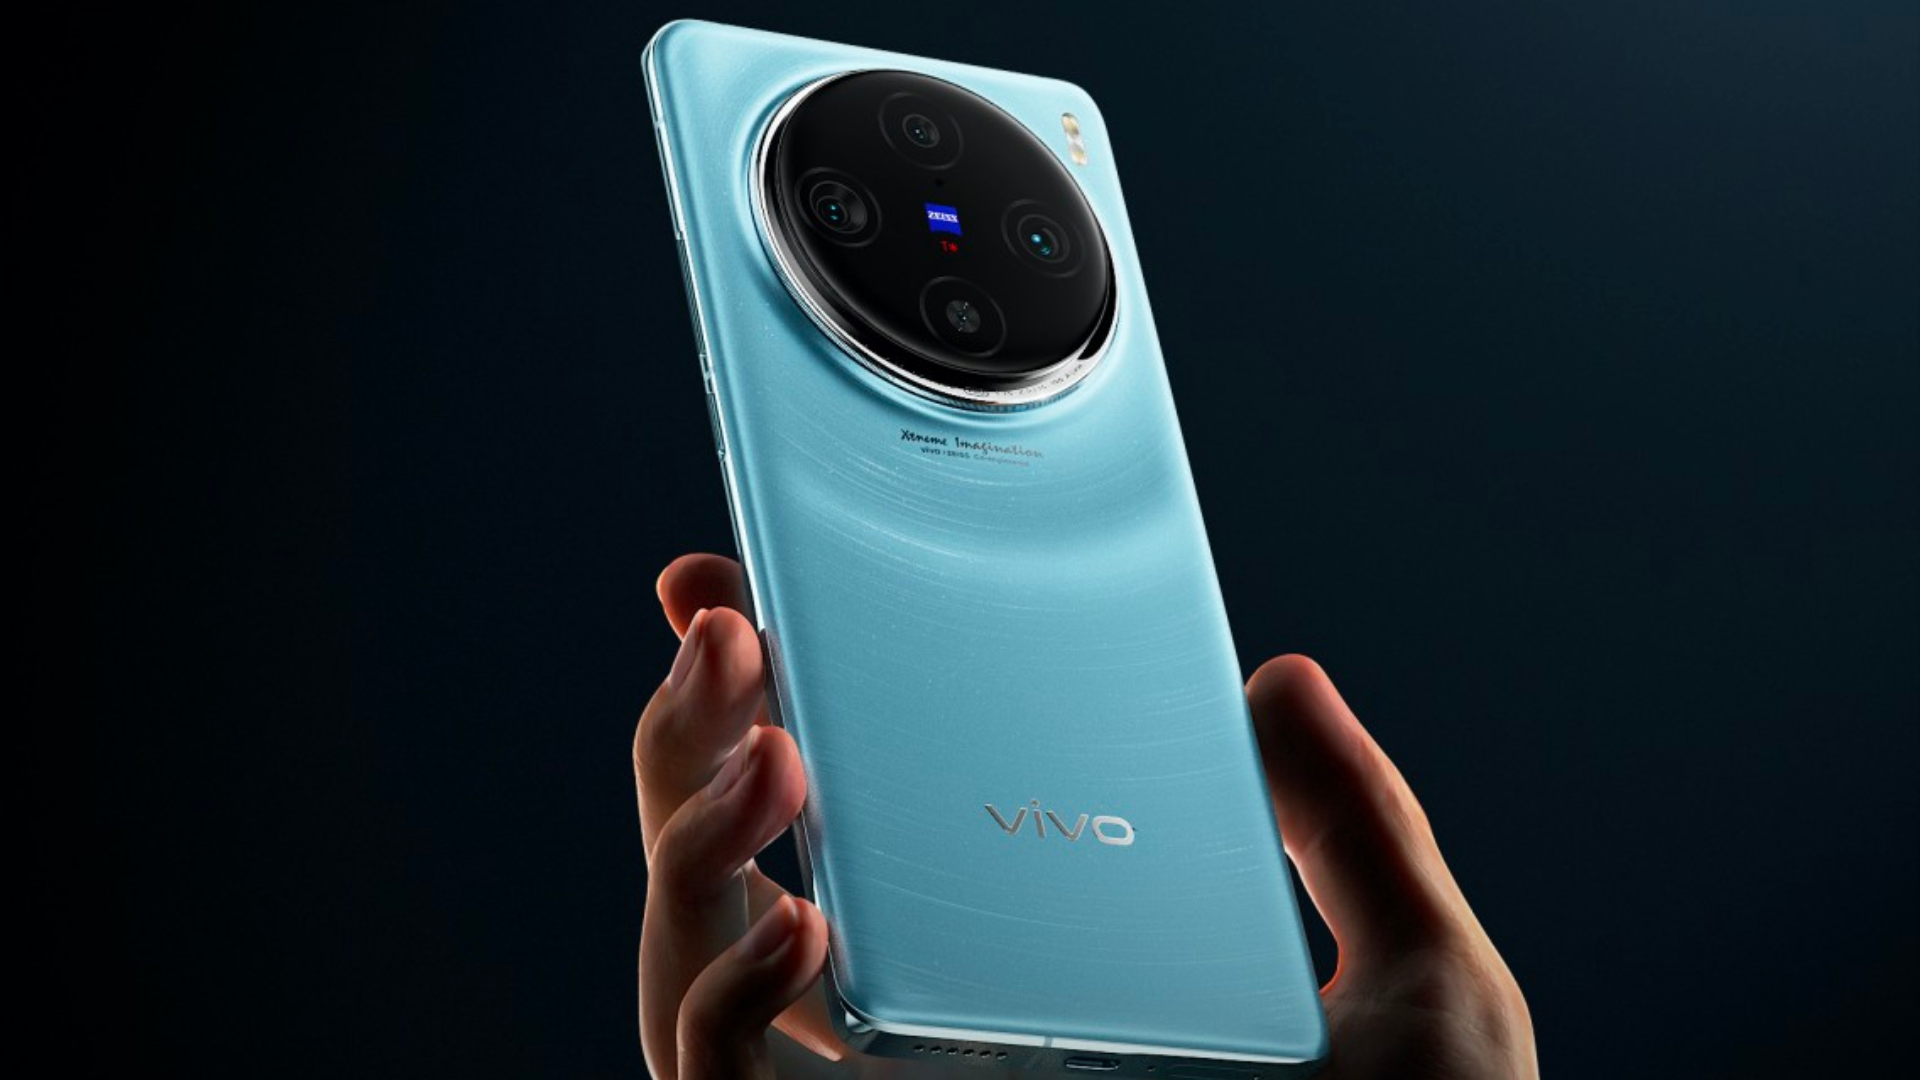 First Smartphone Ever with 200MP Zoom Lens Vivo X100 Pro+